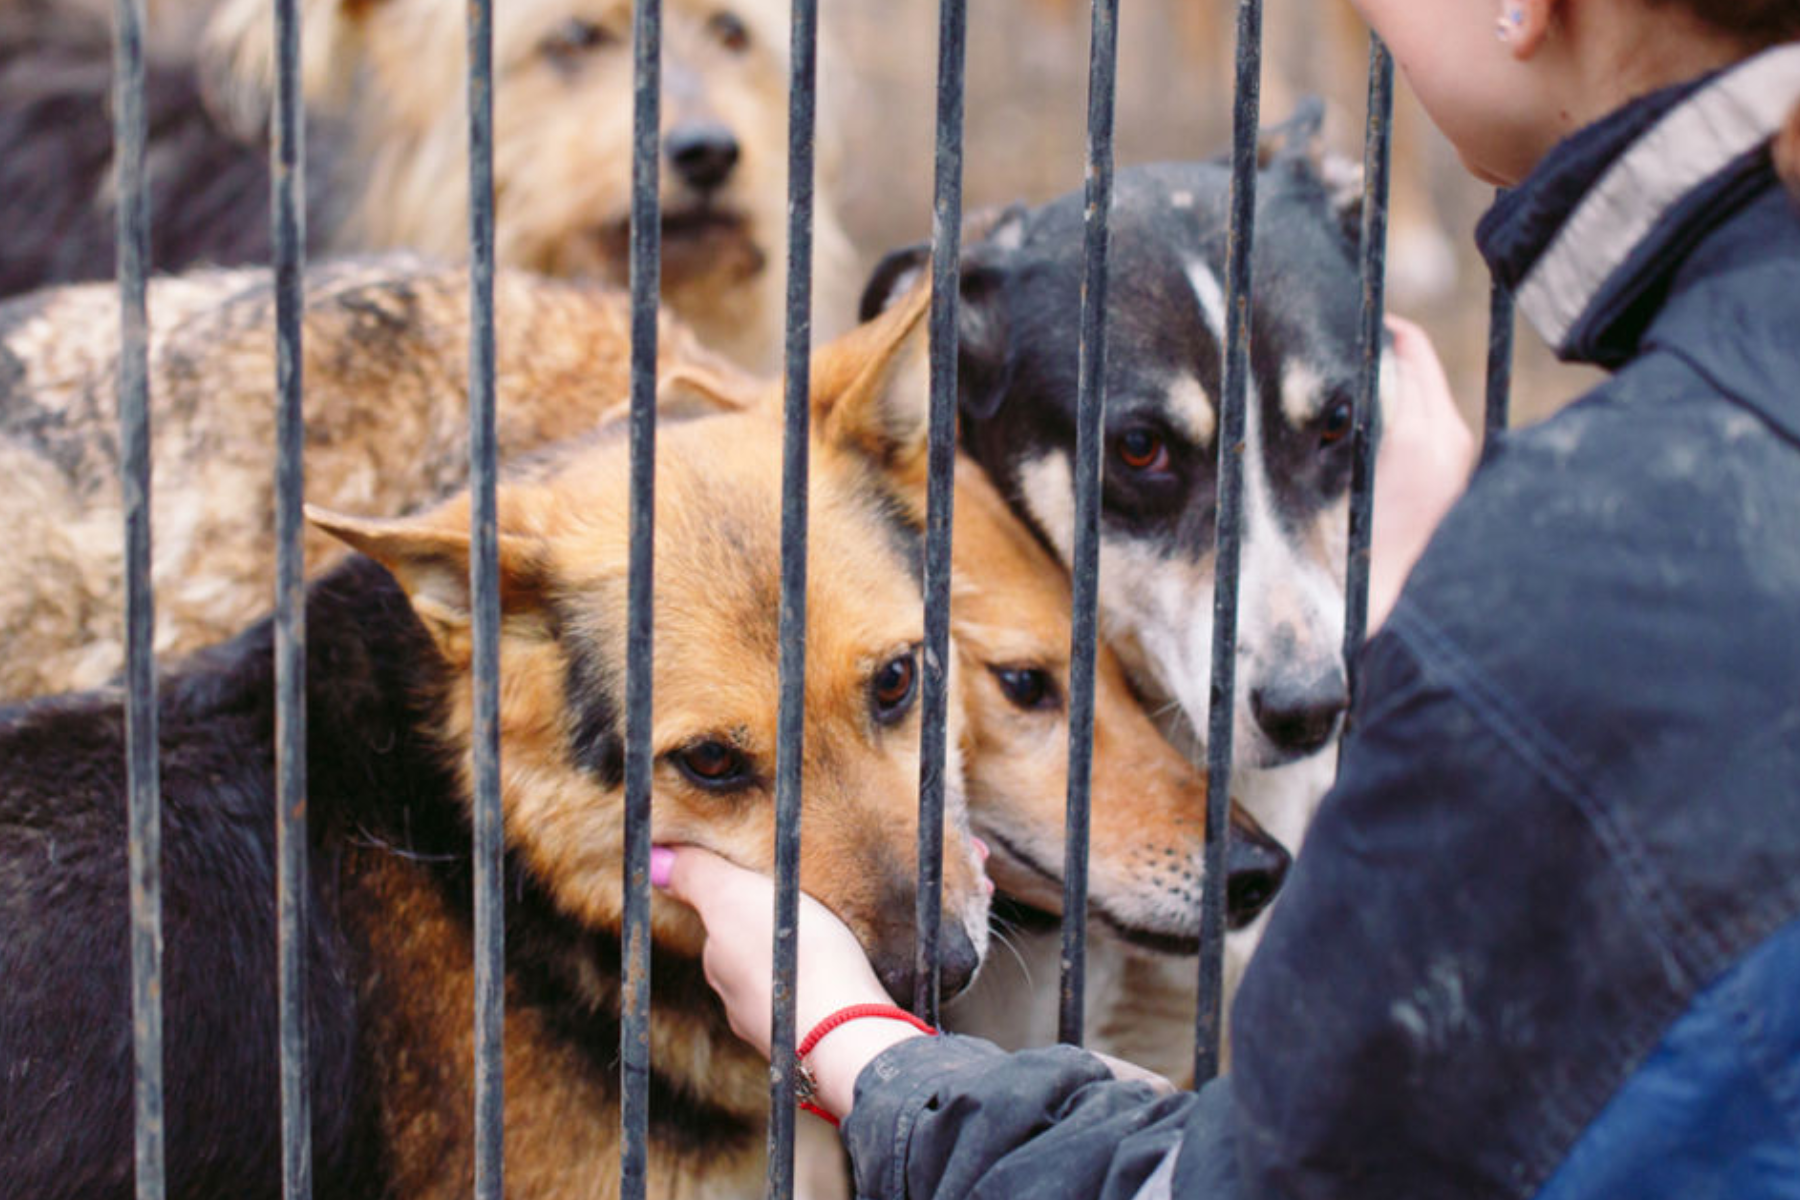 A woman rubs the dogs in a cage